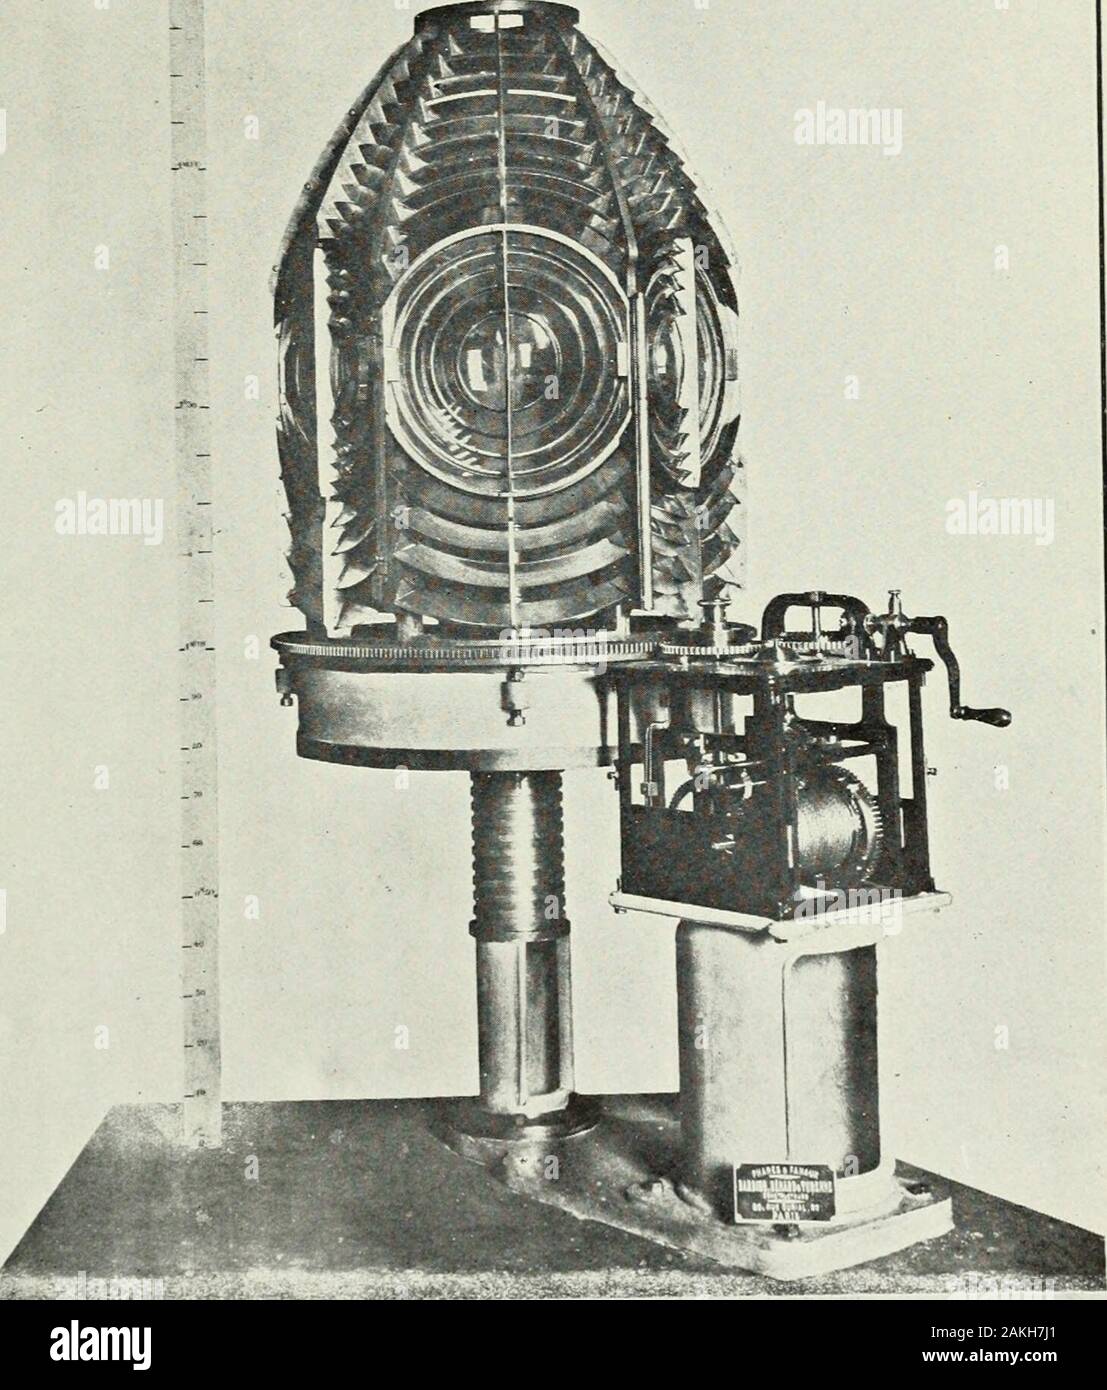 Sessional papers of the Dominion of Canada 1911 . .iej^- &gt;%.-?^-5^;,v-i*S.-;5ej&-^iJi. .--^ Si3afe*^S«fr^^ Lightning-light apparatus of the 3rd order, small size, showing a single flash every five seconds. 21-21 Stock Photo